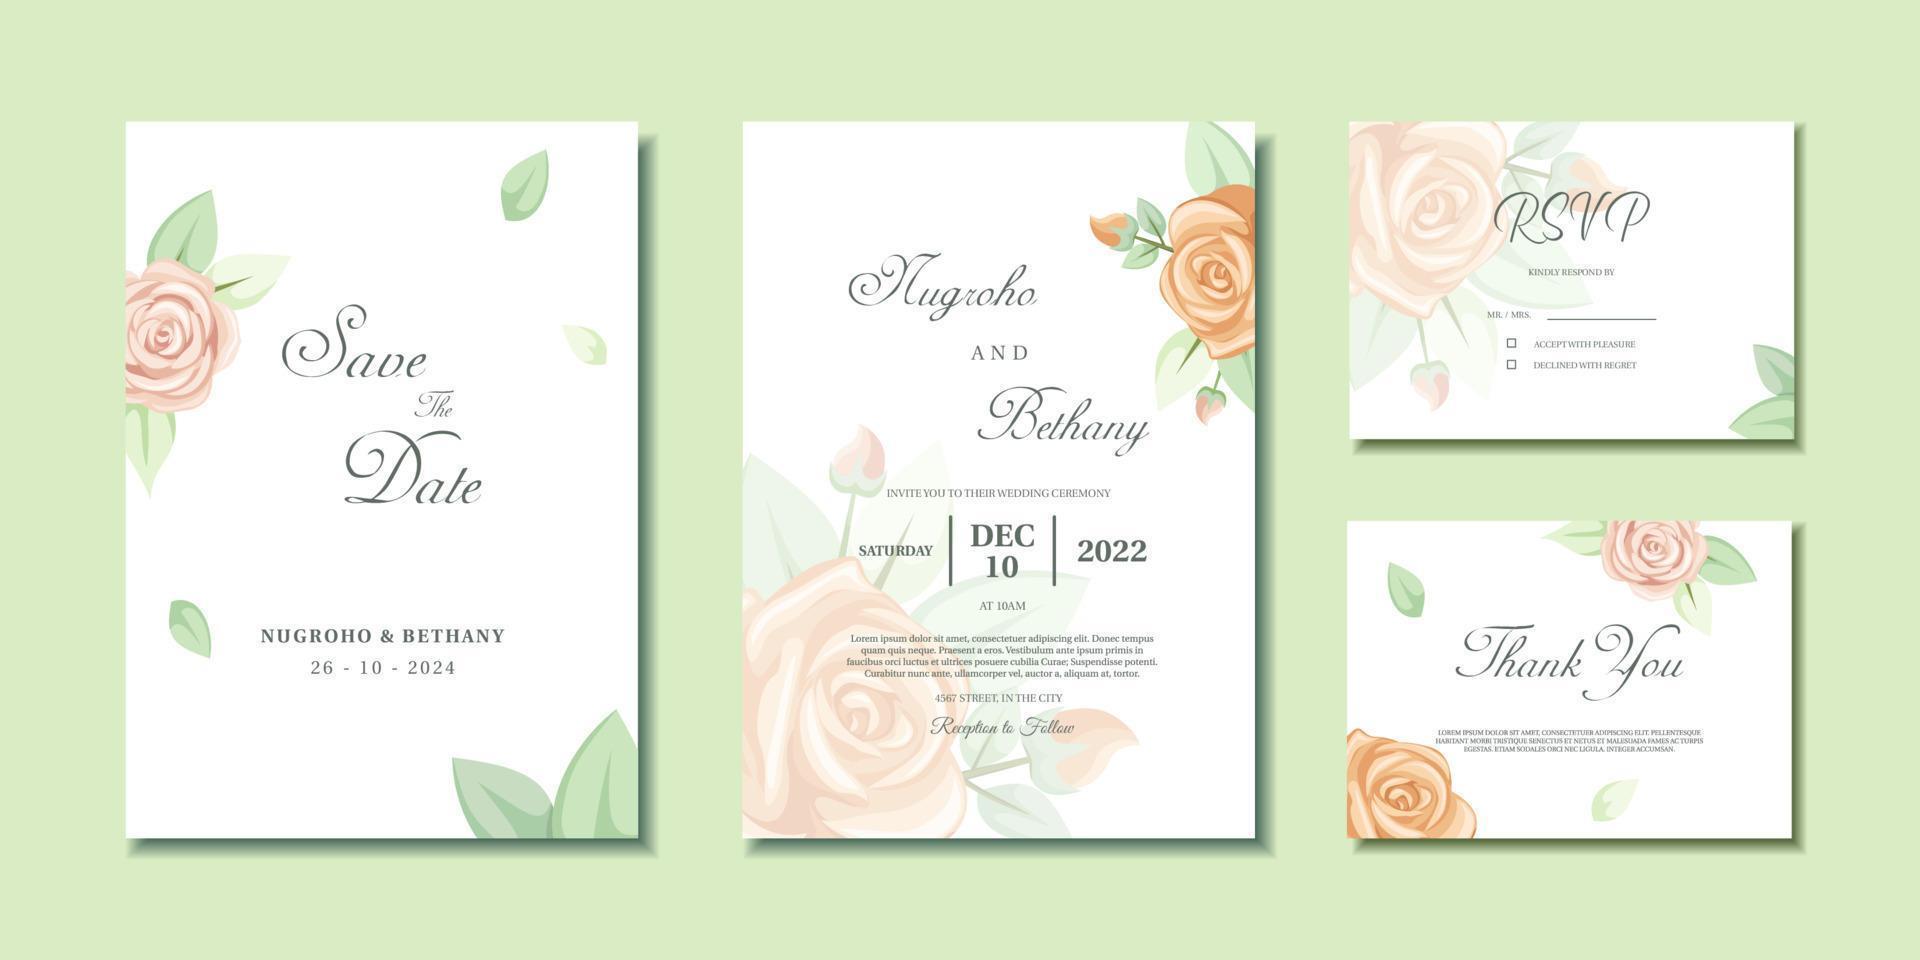 Wedding invitation with beautiful pink rose bouquet and leaves. Wedding invitation, Thank you card and RSVP with rose flower bouquet vector